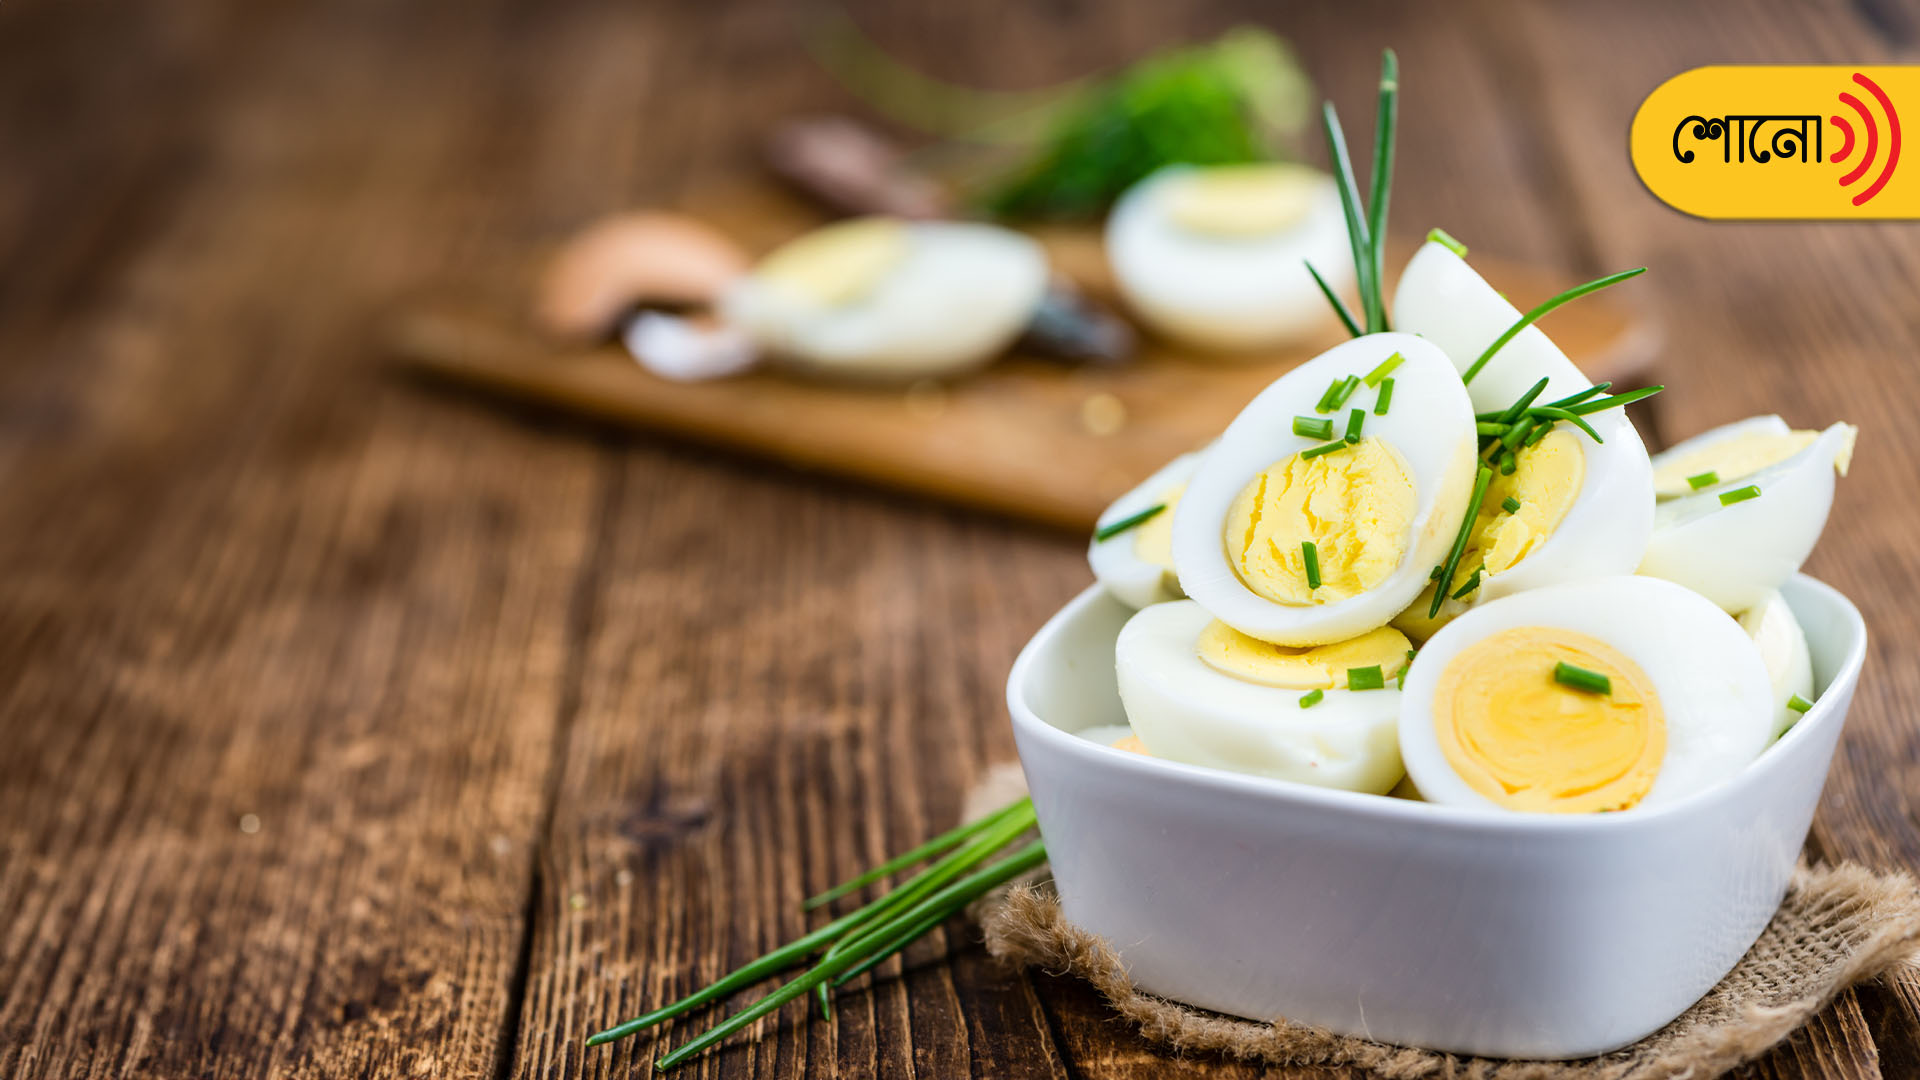 Having an egg daily can trigger diabetes, says new research